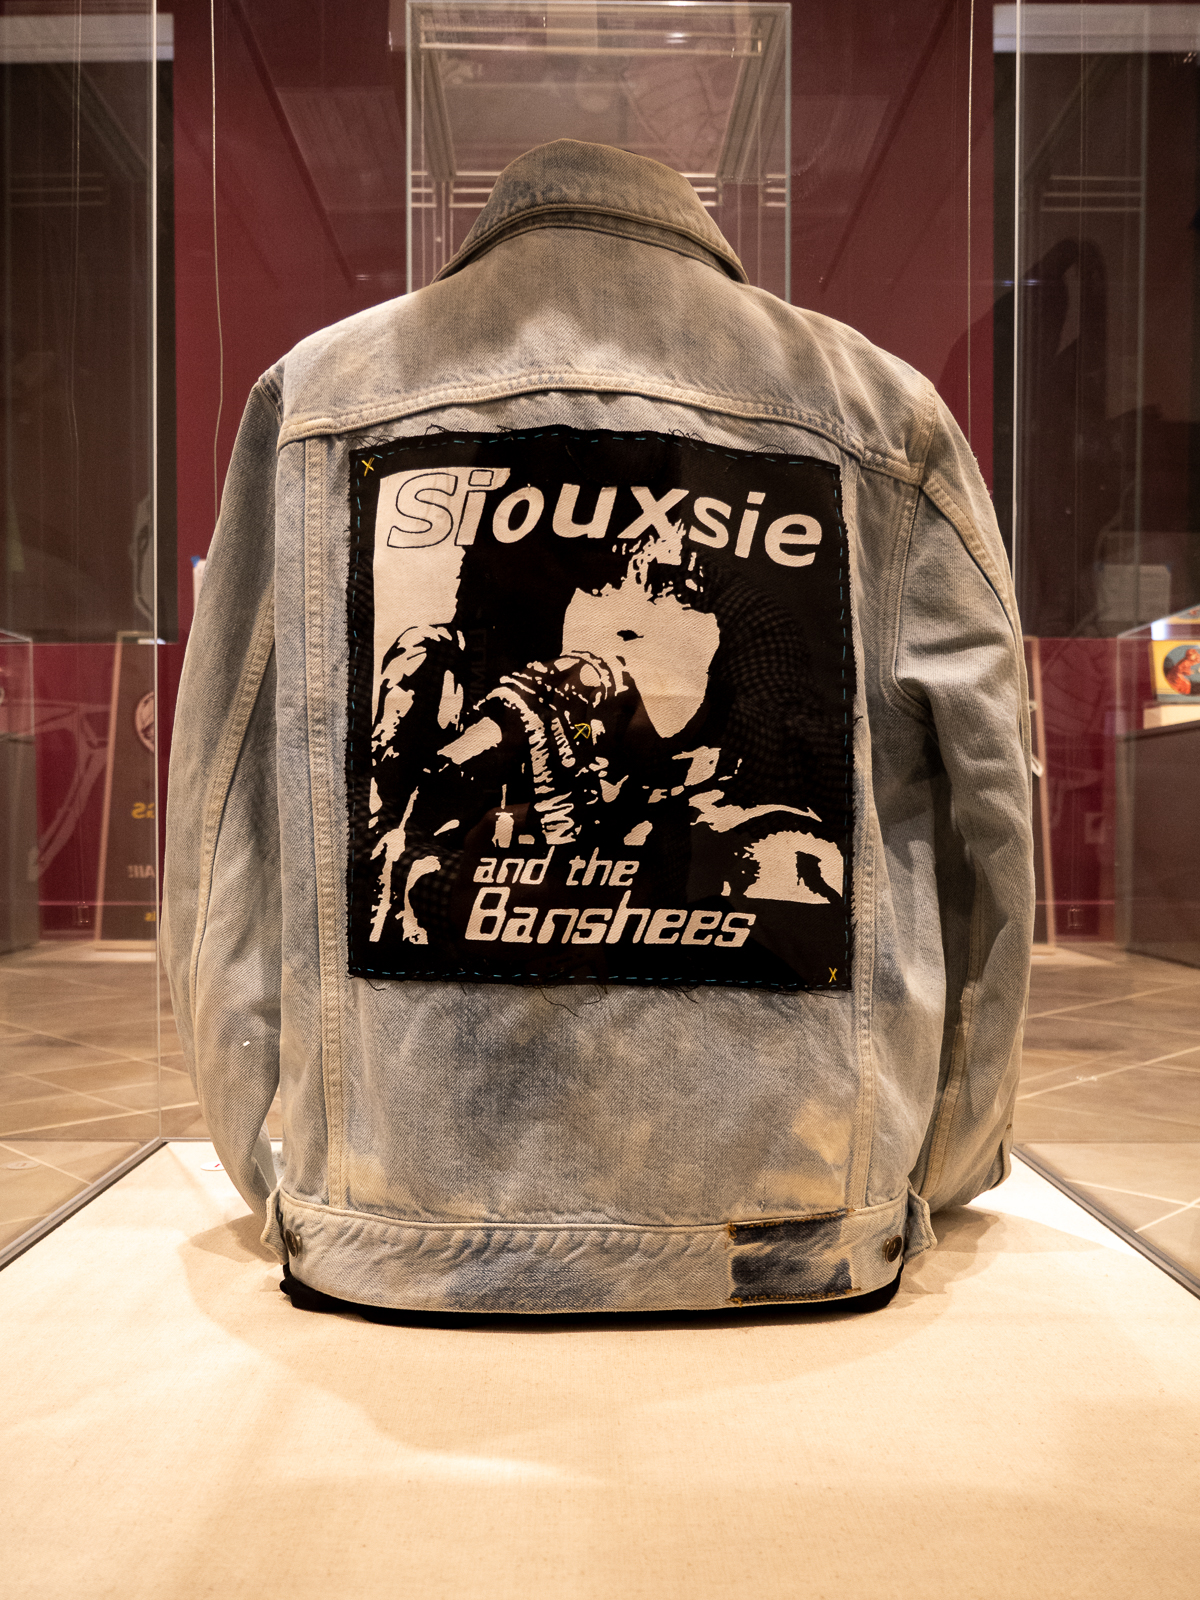 Vintage Jean jacket with patch depicting Siouxsie Sioux, lead singer of band Siouxsie and the Banshees, n.d. On loan from a private collection.